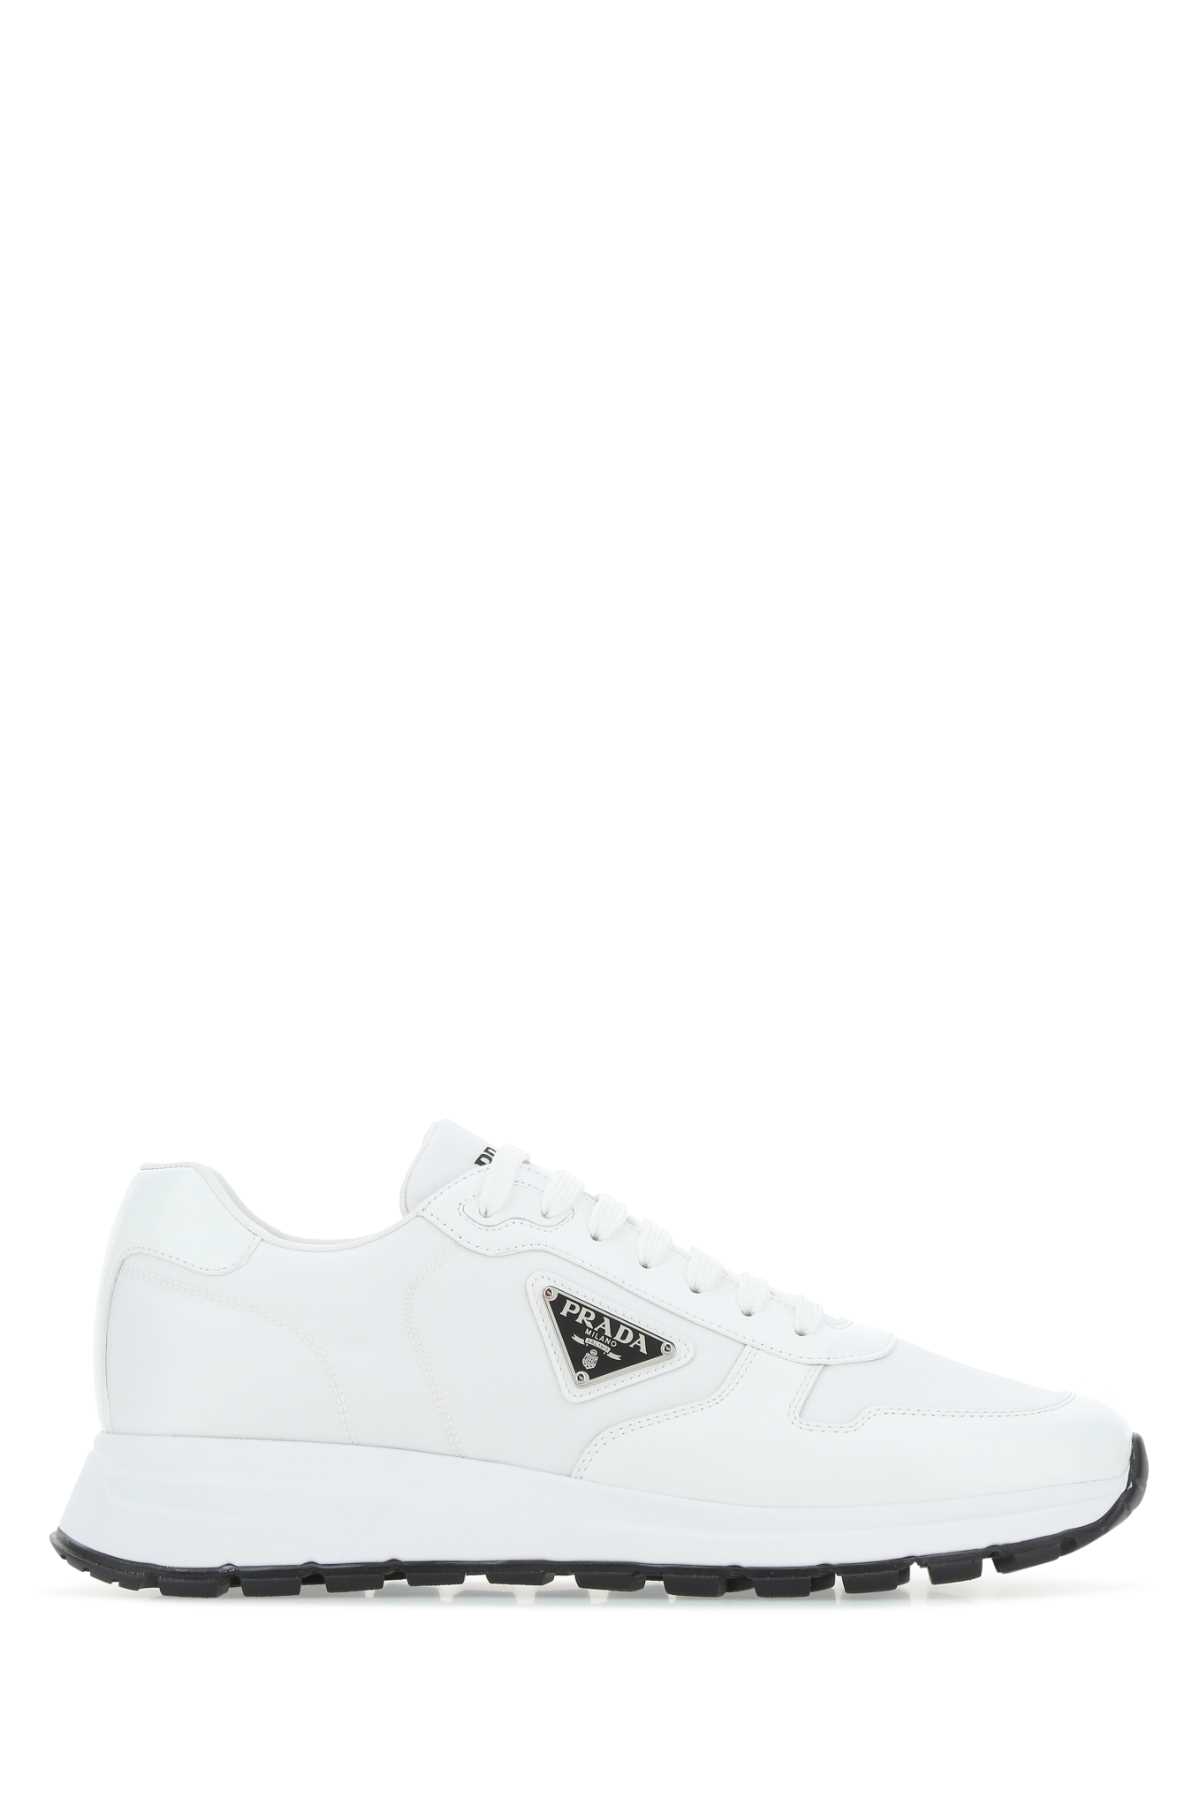 Prada White Re-nylon And Leather Sneakers In F0964